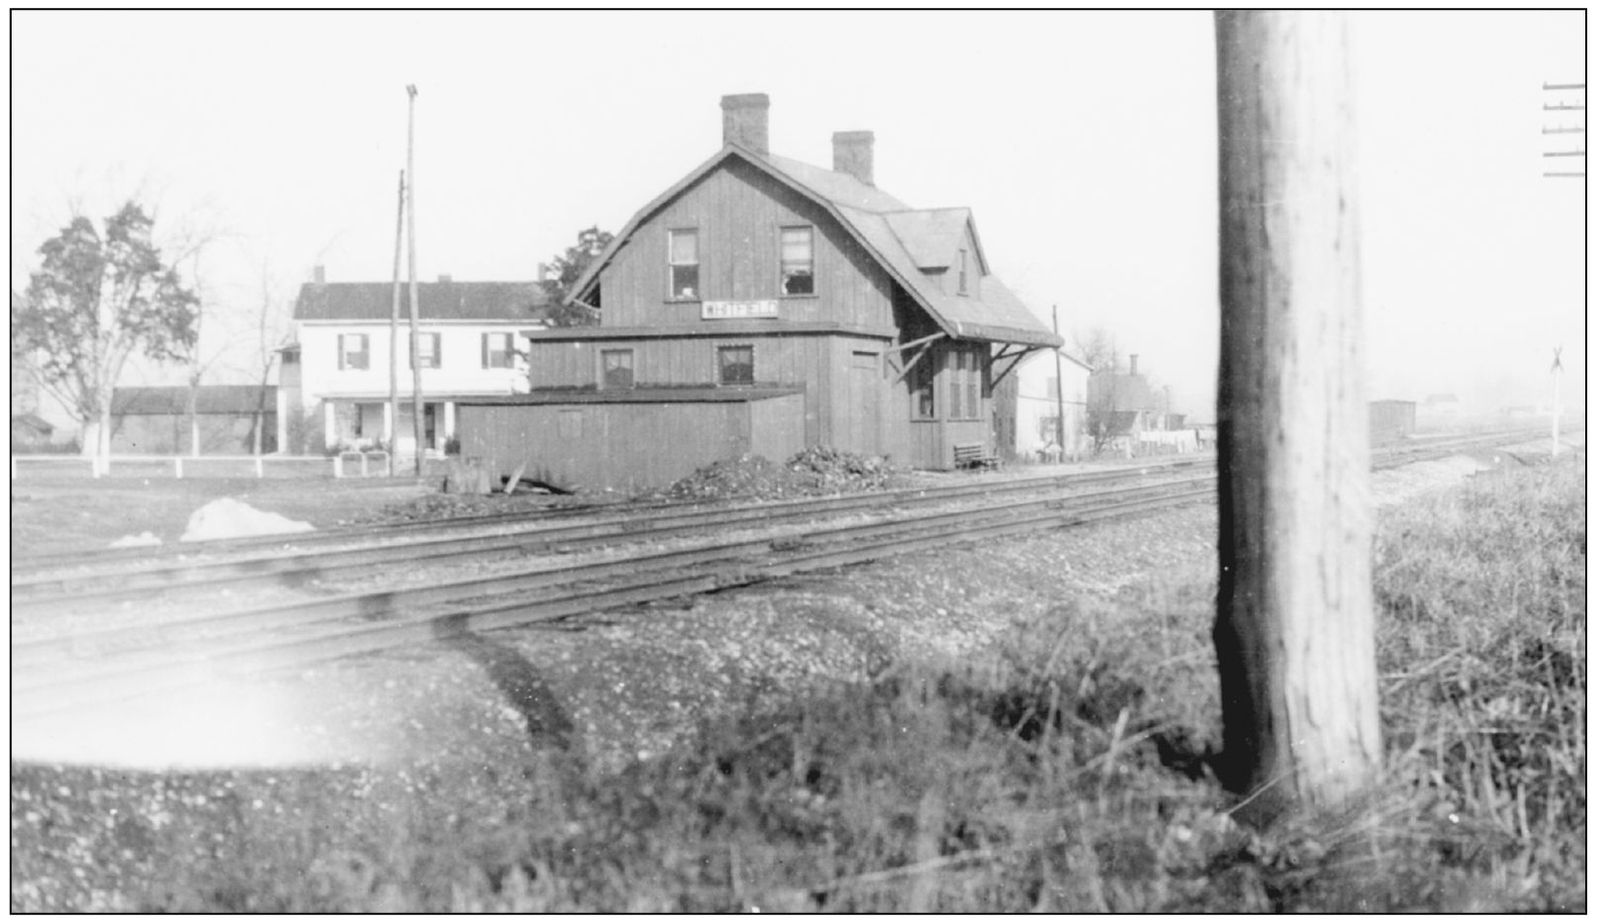 Whitfield was served by this two-story depot with living quarters for the agent - photo 4